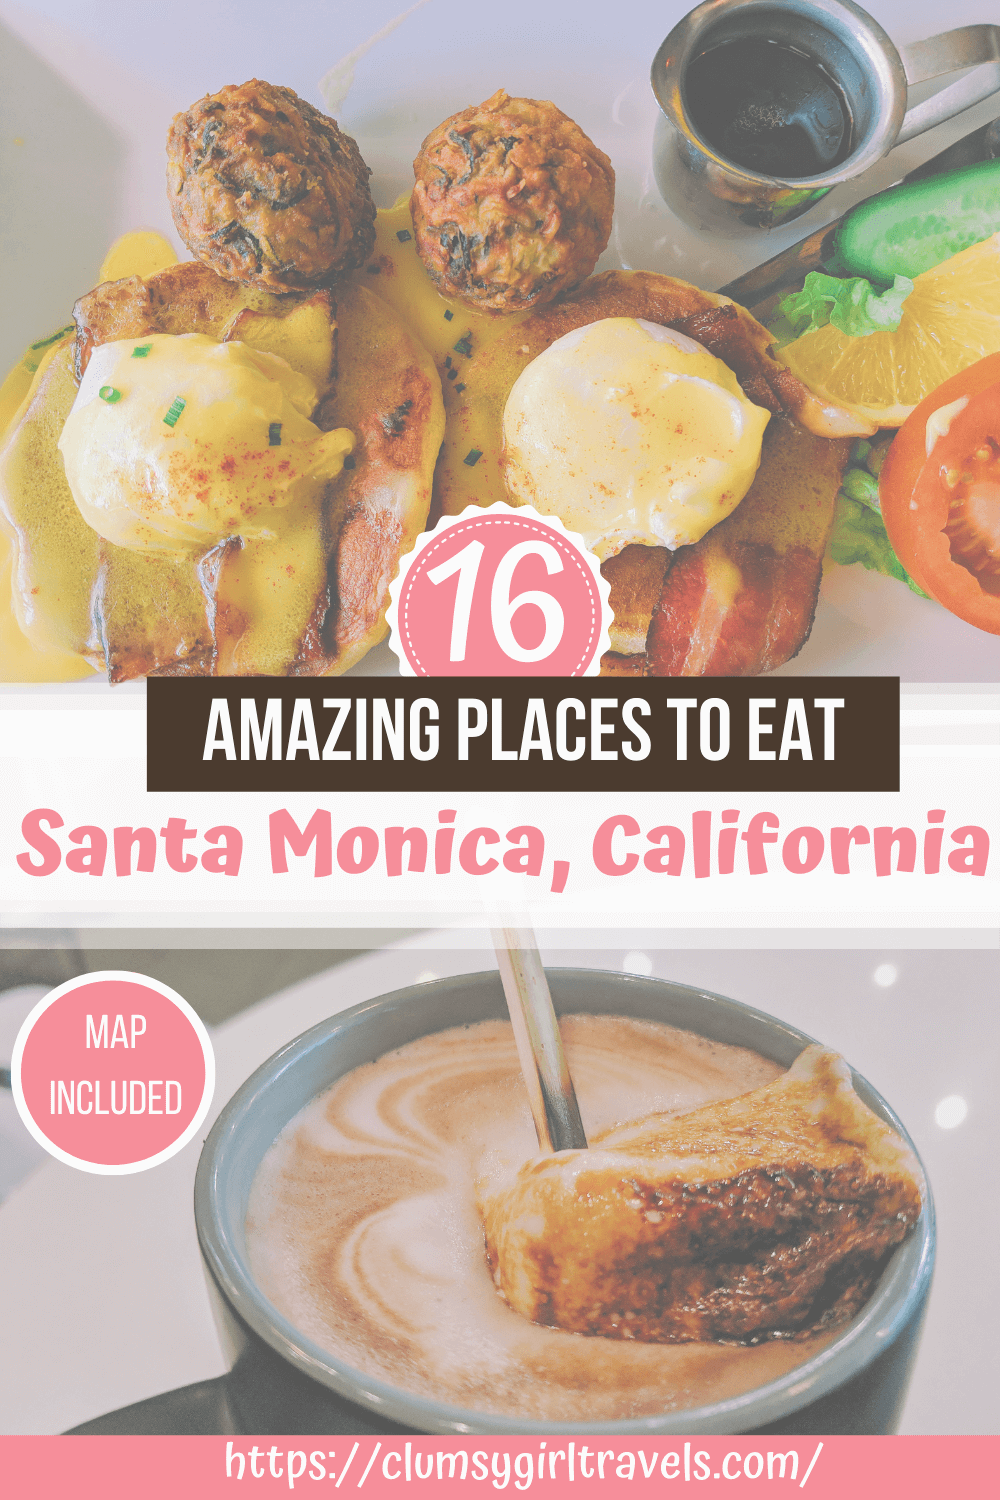 If you are wondering where to eat in Santa Monica, this is the guide for you. Santa Monica has tons of amazing restaurants just waiting to be discovered. #santamonicatravel #losangelestravel #californiatravel